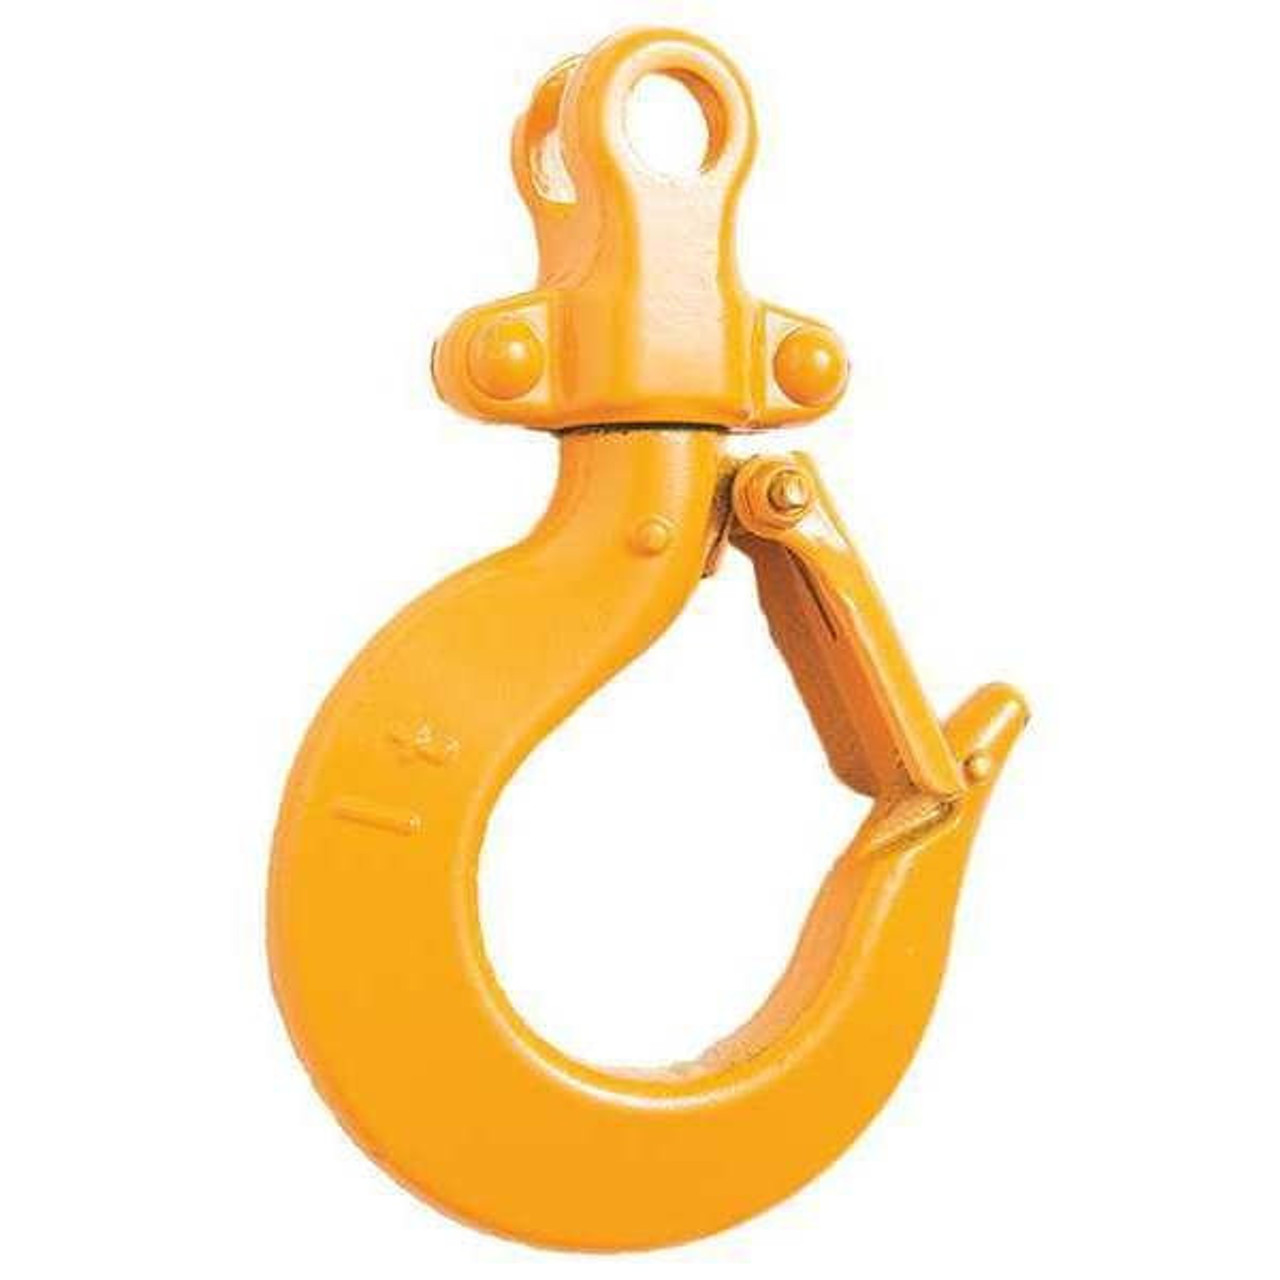 Top Hook Assembly, Product Type Top Hook Assembly, Compatible Hoist Type Lever Chain Hoists, Compatible Load Capacity 4,000 lb, Compatible Series L5LB, Material Steel Alloy, Overall Length Not Applicable, Overall Width 4.7 in, Overall Height Not Applicable, Includes Safety Latch